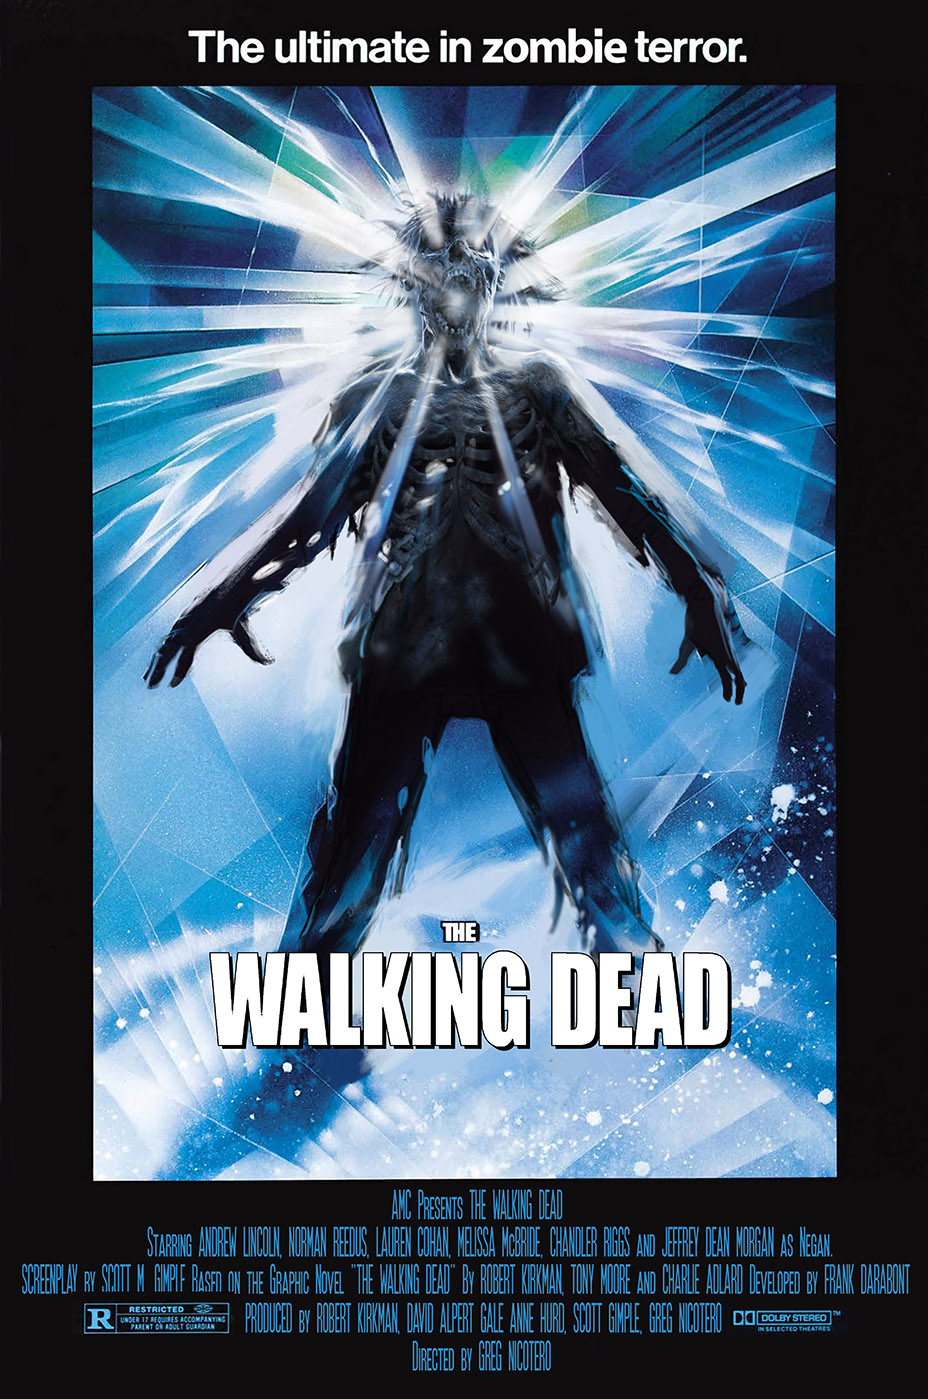 The Walking Dead Takes Over Some Of The Most Famous Movie Posters Ever